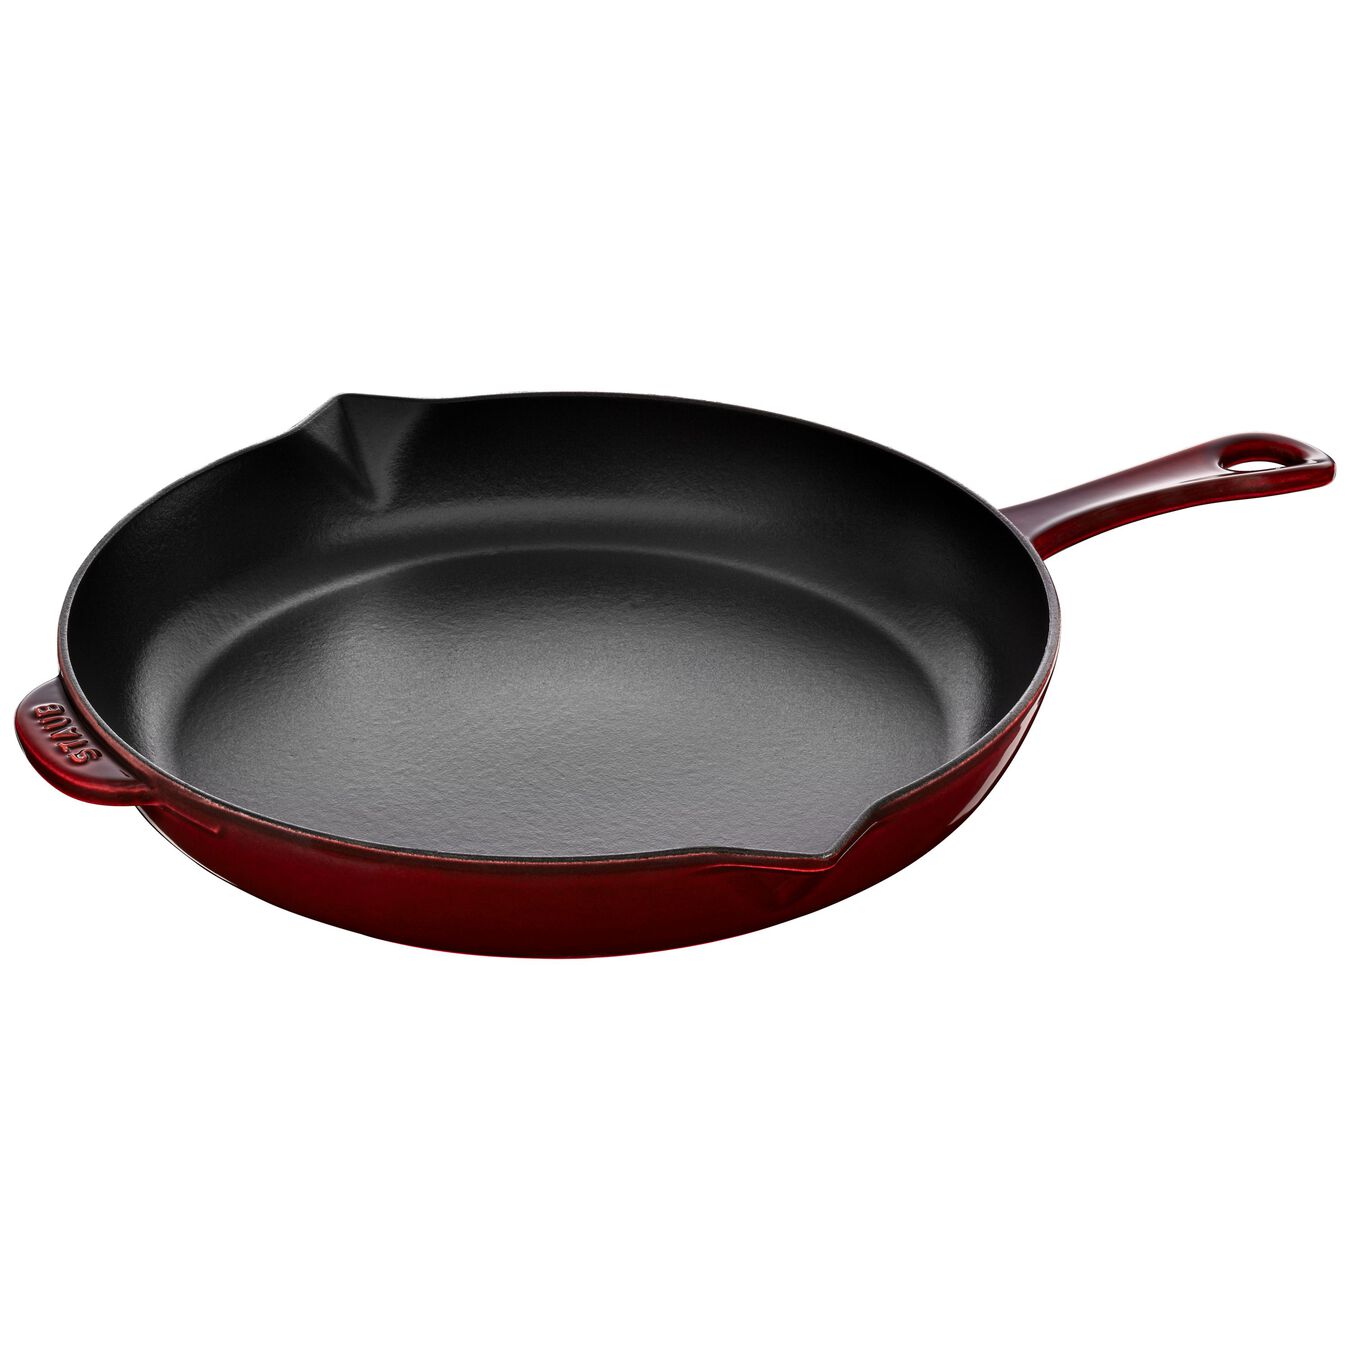 30 cm / 12 inch cast iron Frying pan, grenadine-red,,large 1